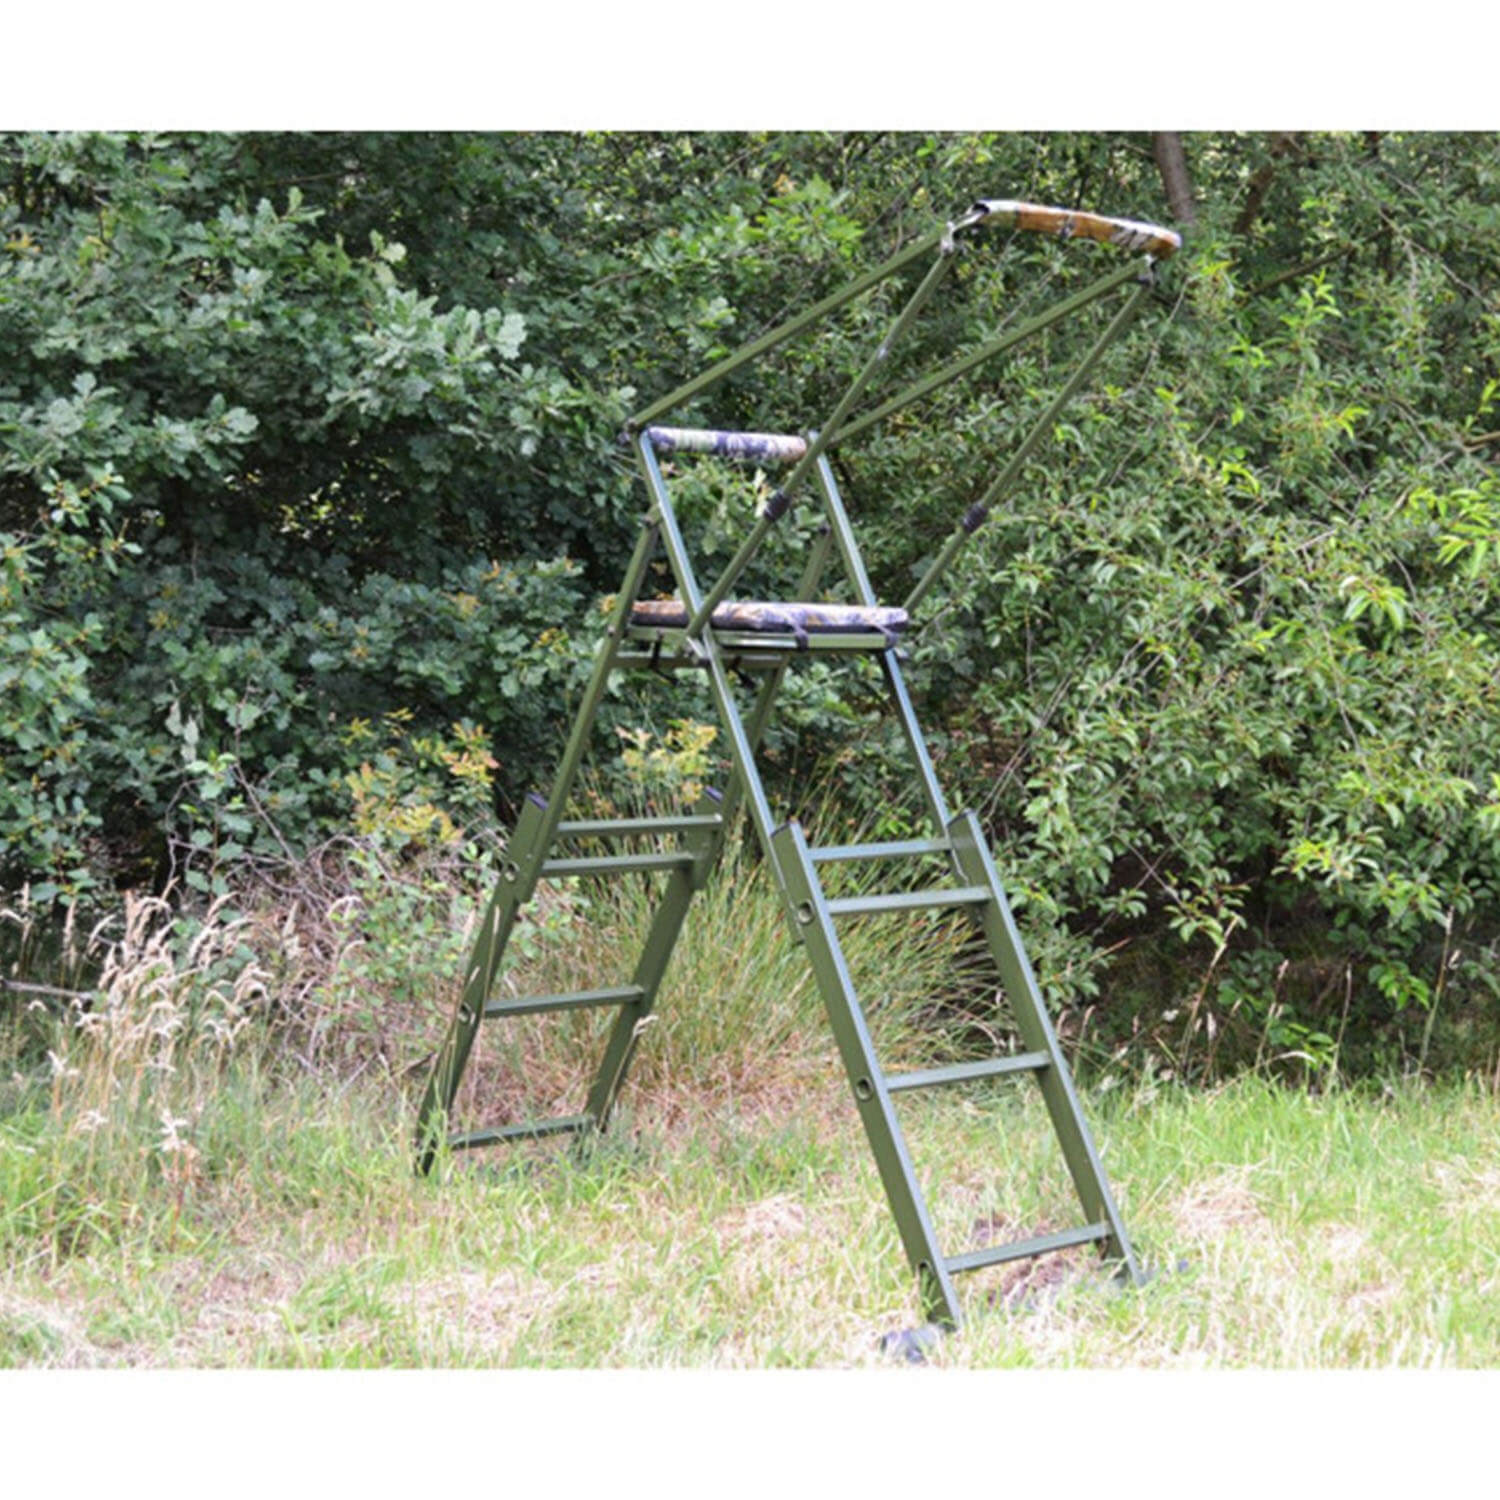 Farm-Land hunting ladder mobile stand